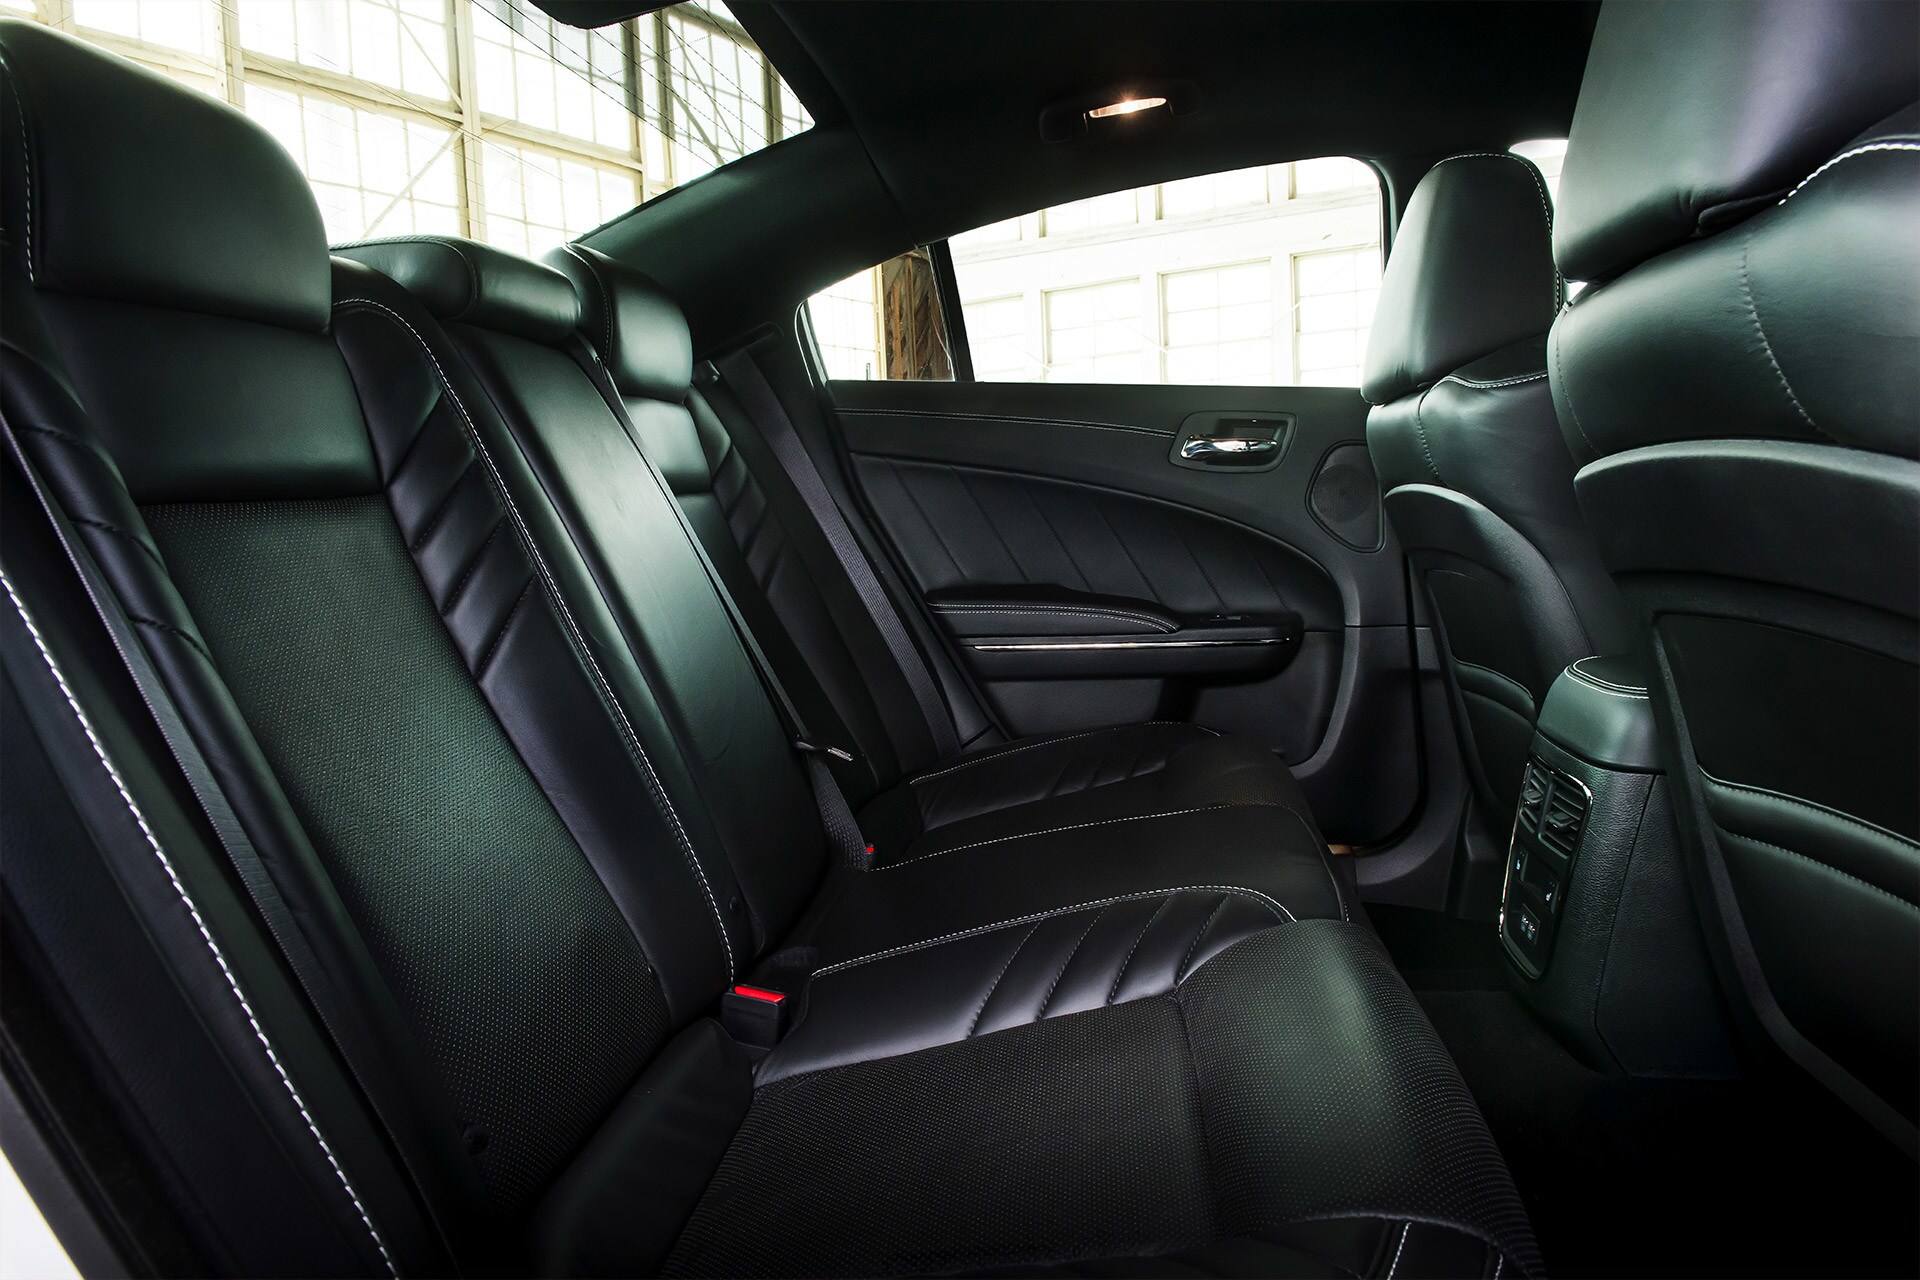 The 2022 Charger Rear Passenger Seating